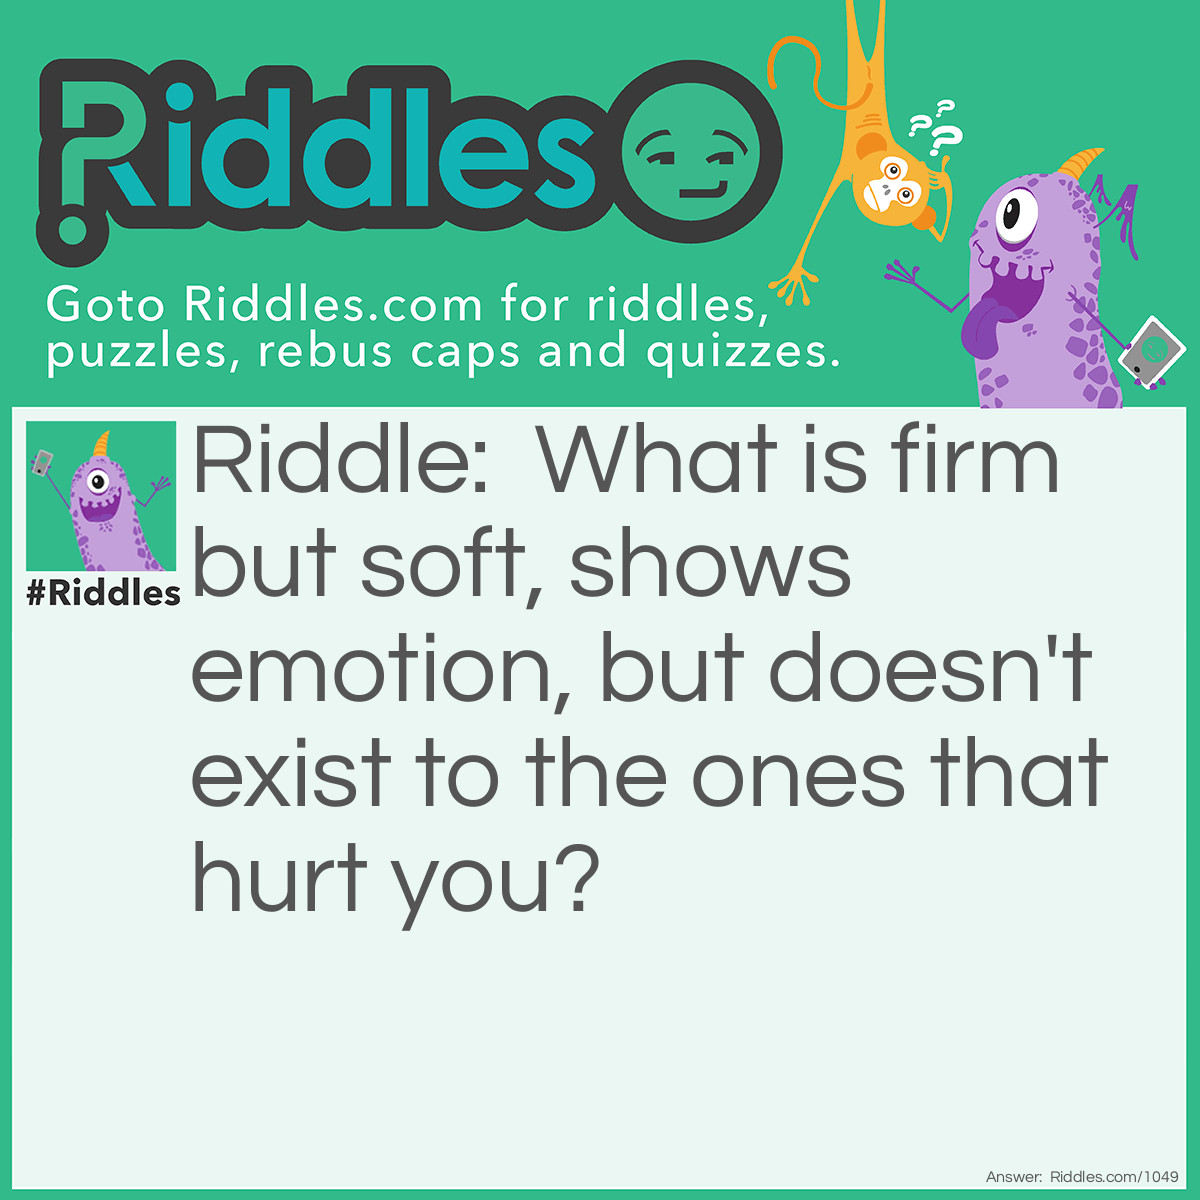 Riddle: What is firm but soft, shows emotion, but doesn't exist to the ones that hurt you? Answer: Your feelings.